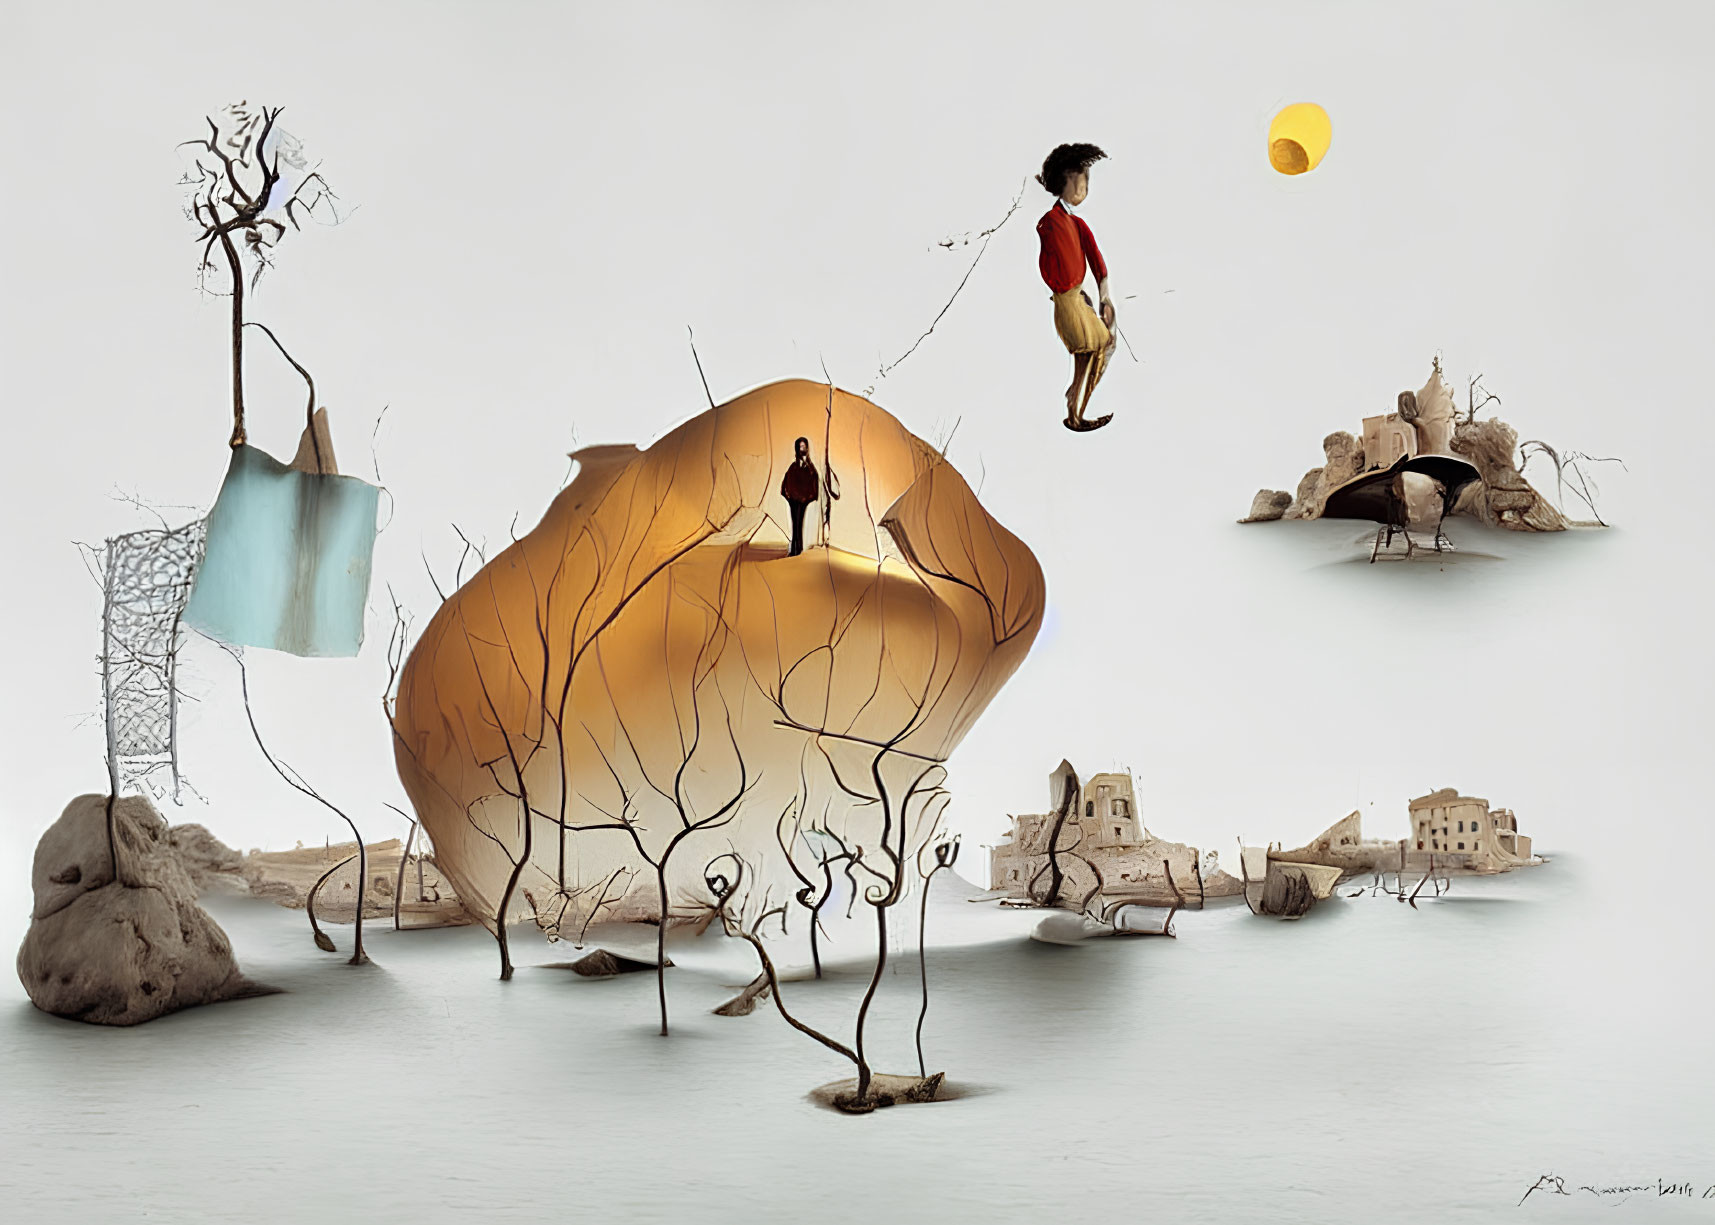 Surreal artwork featuring person on whimsical structure with abstract forms and distant town under yellow orb.